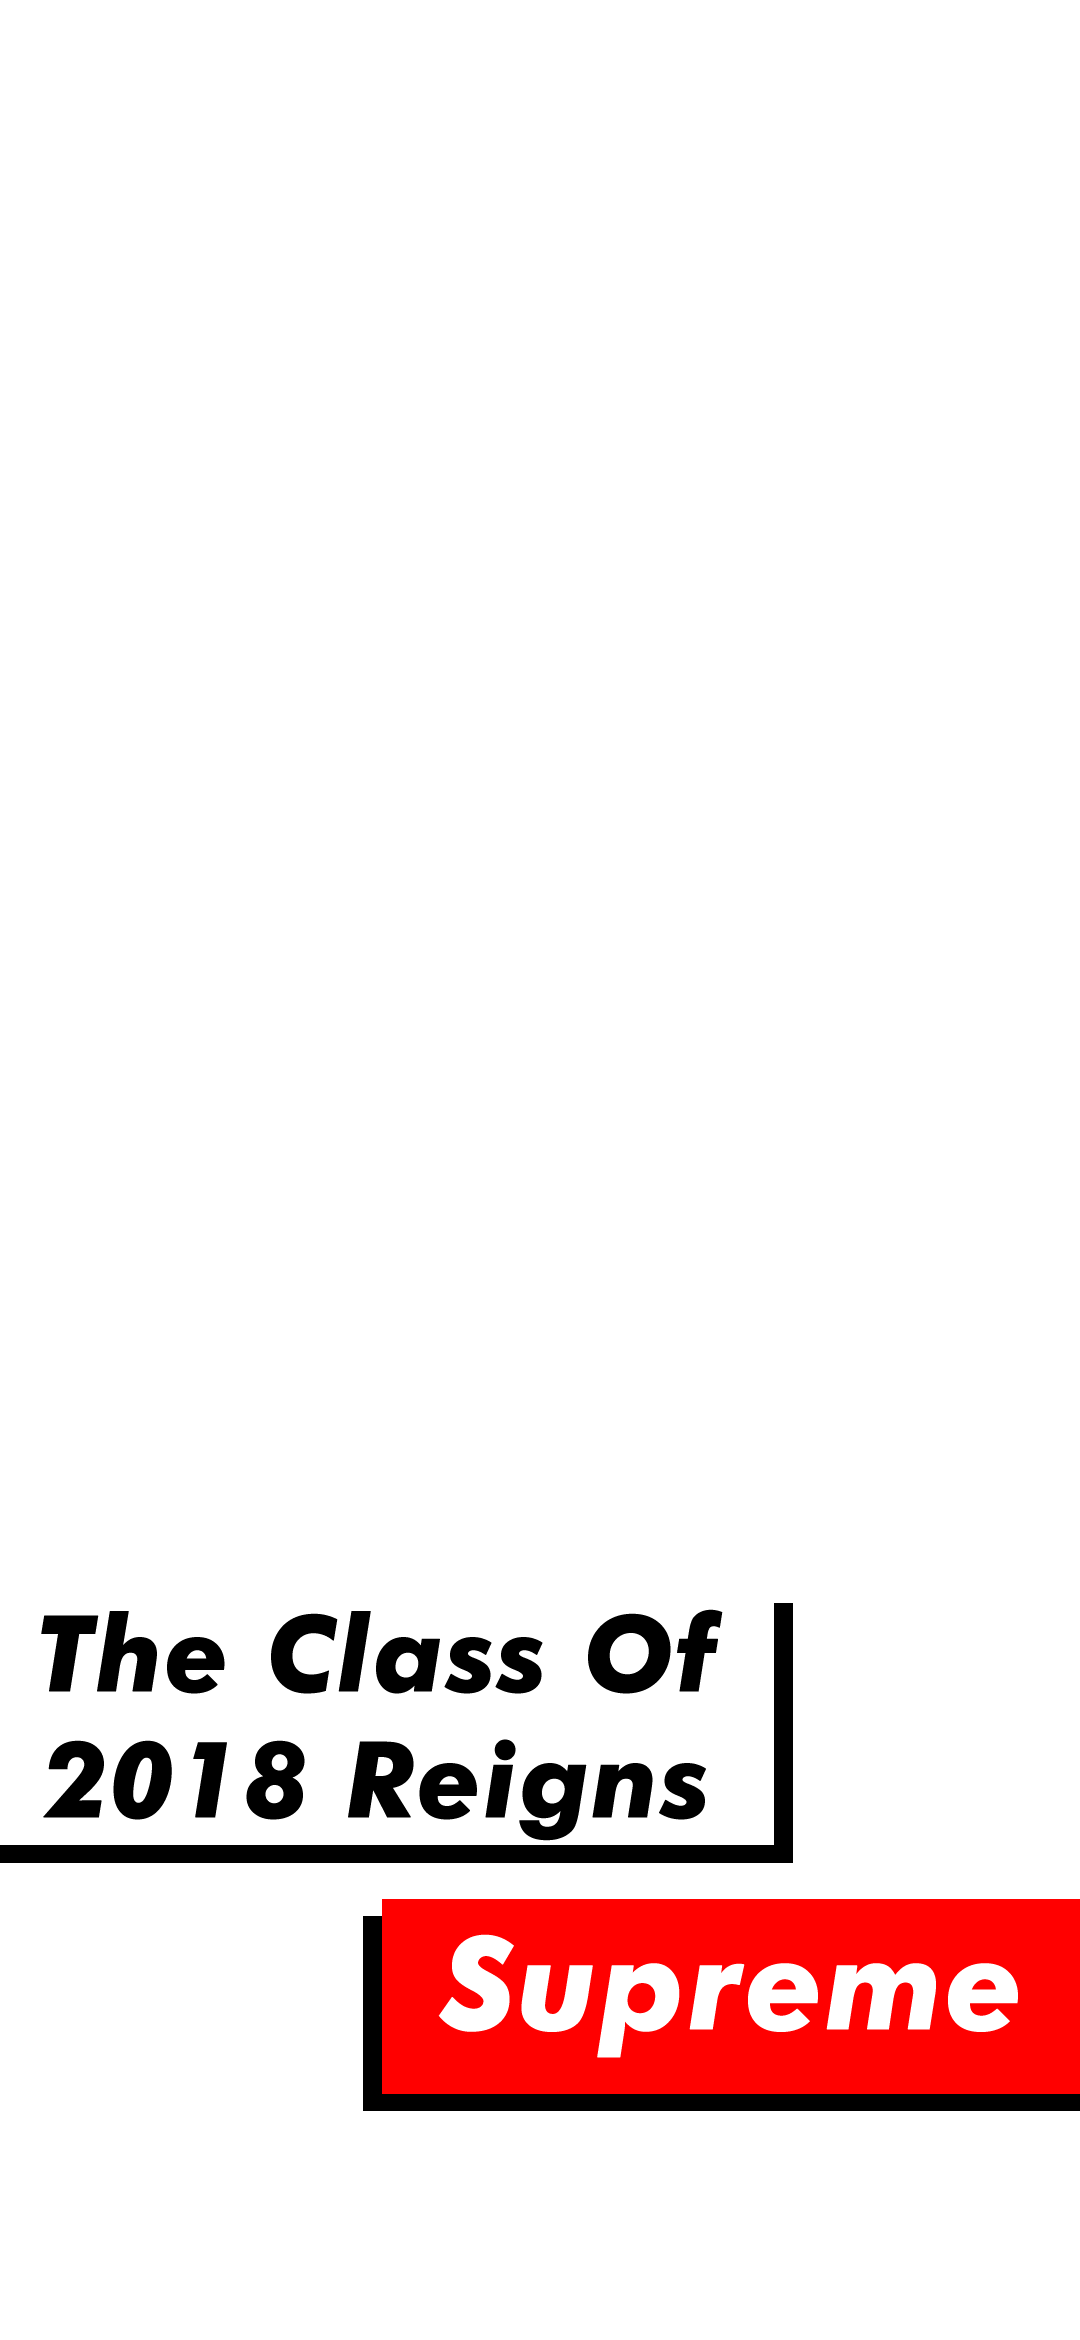 The Class of 2018 Snapchat Geofilter created by Joey Babcock.